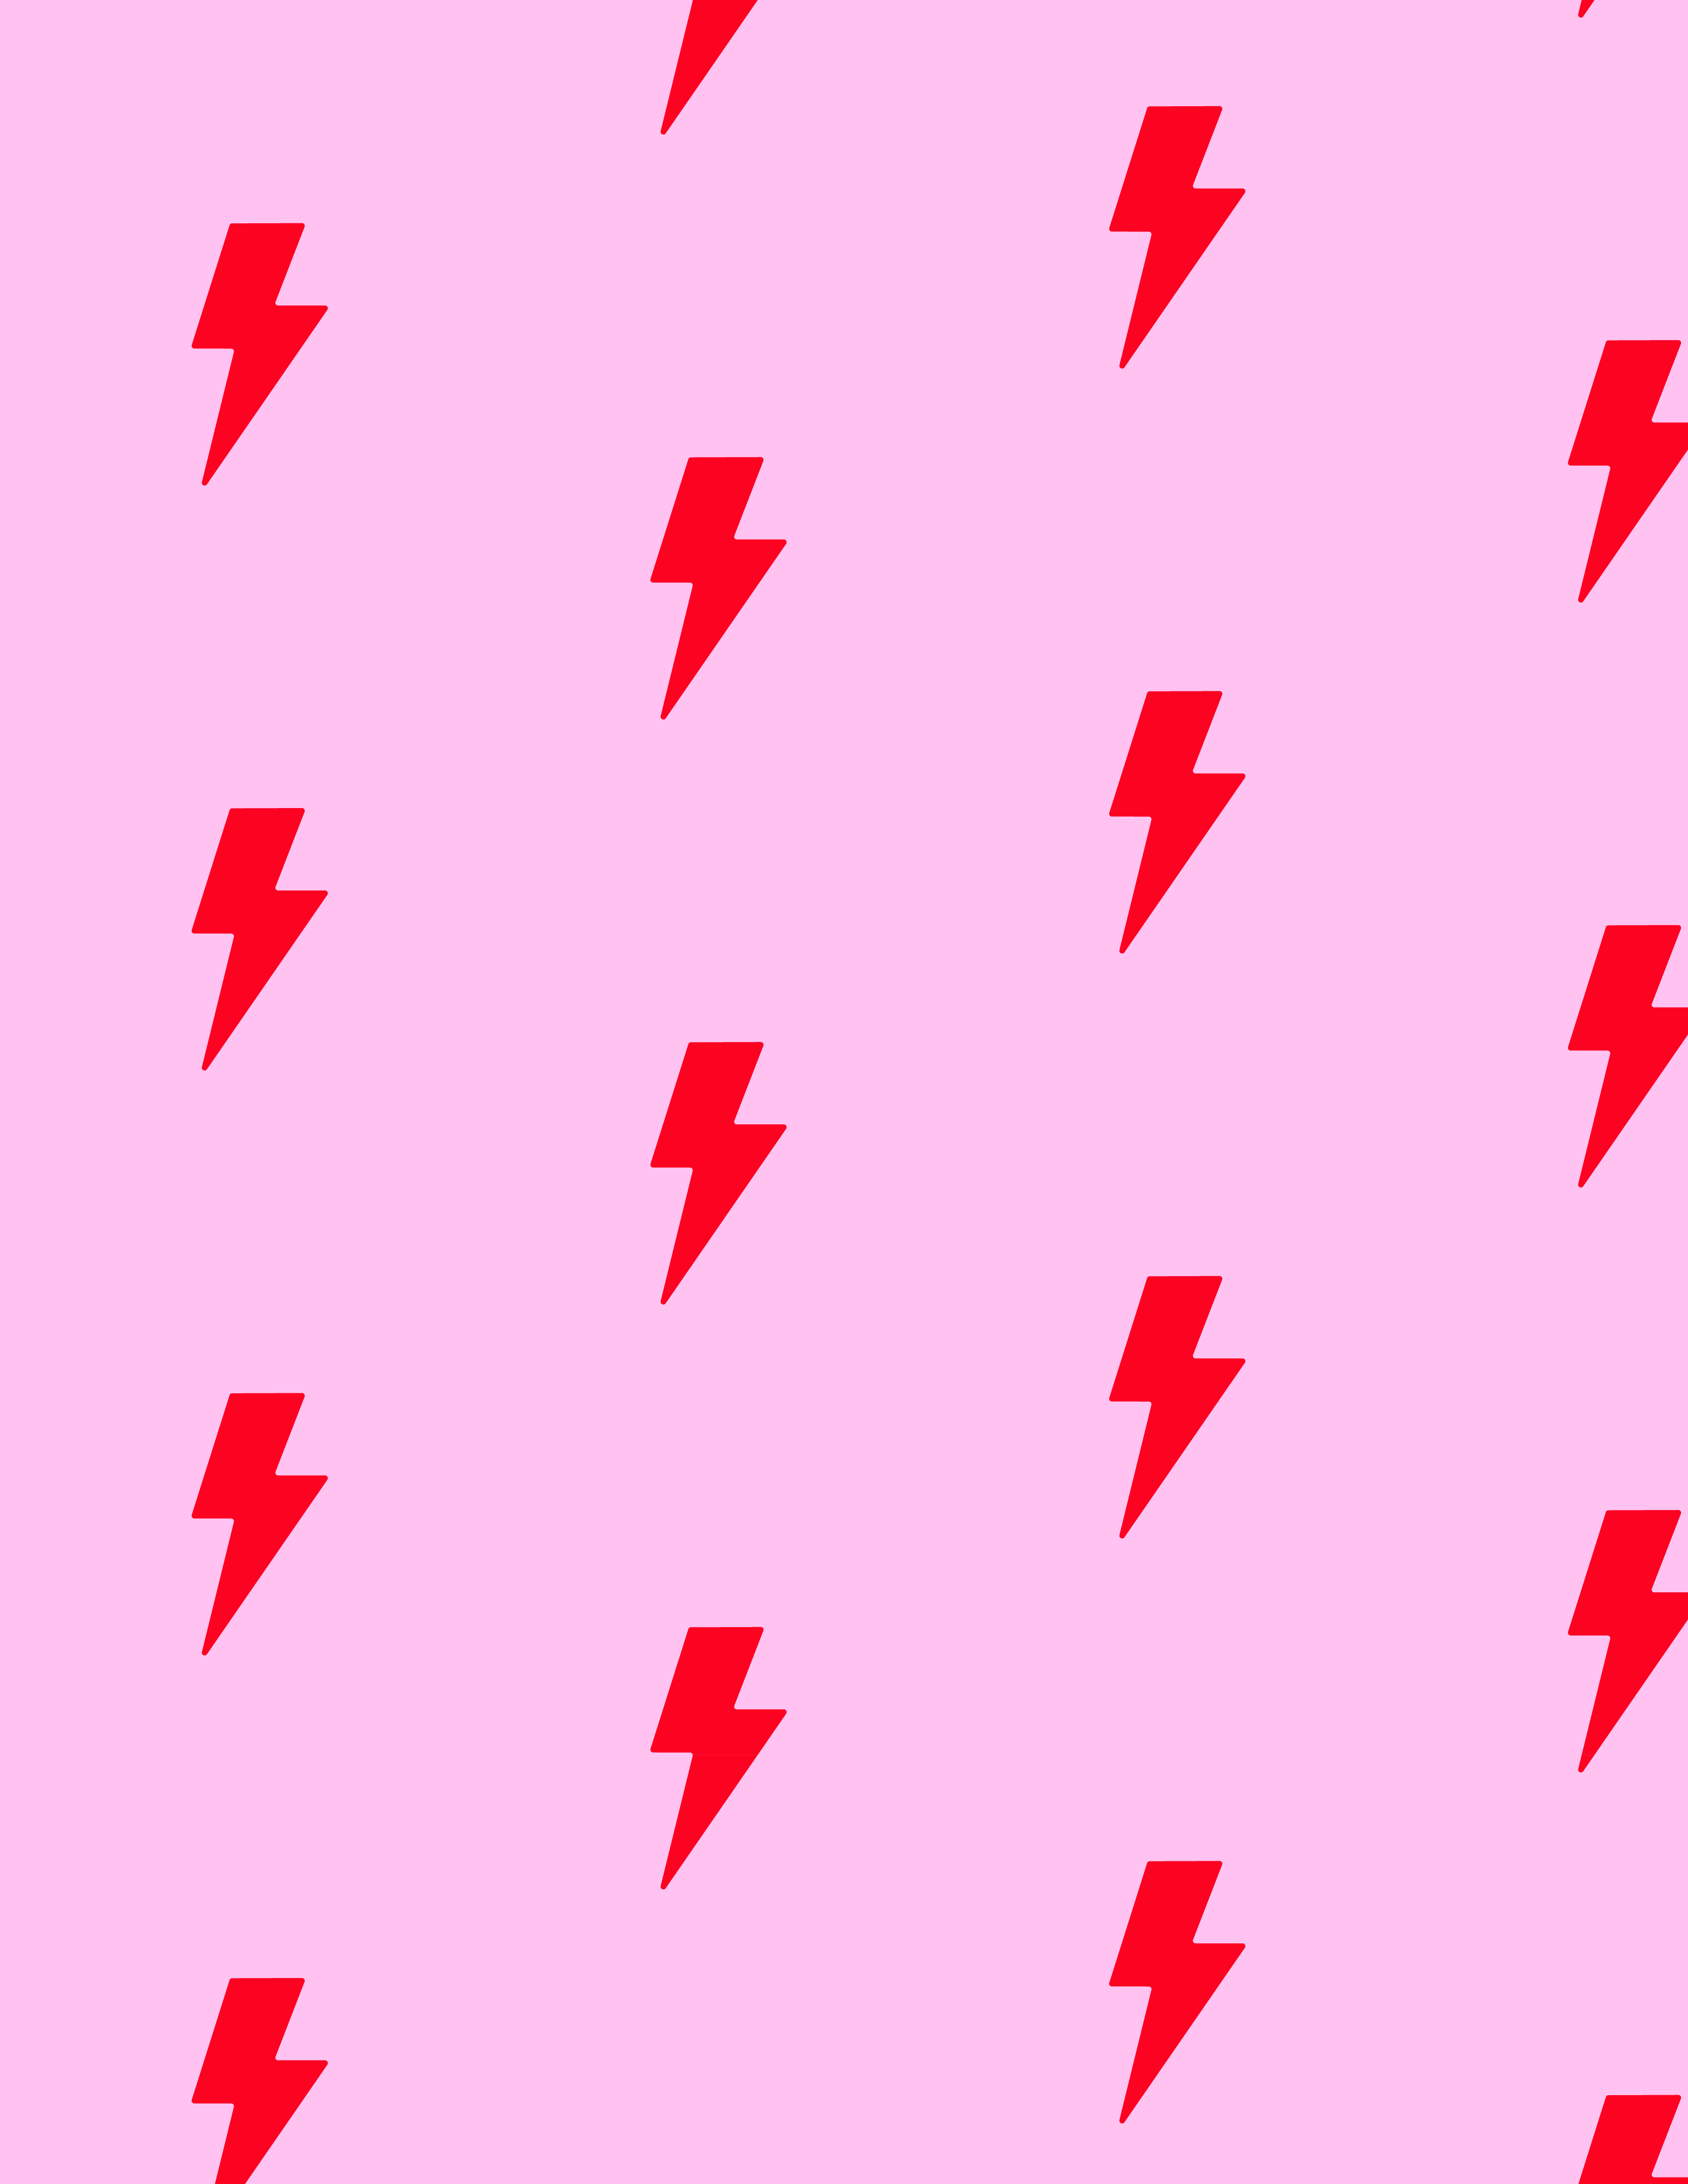 lightning bolt pink and red vsco phone background. Preppy wallpaper, Preppy prints, Bedroom wall collage